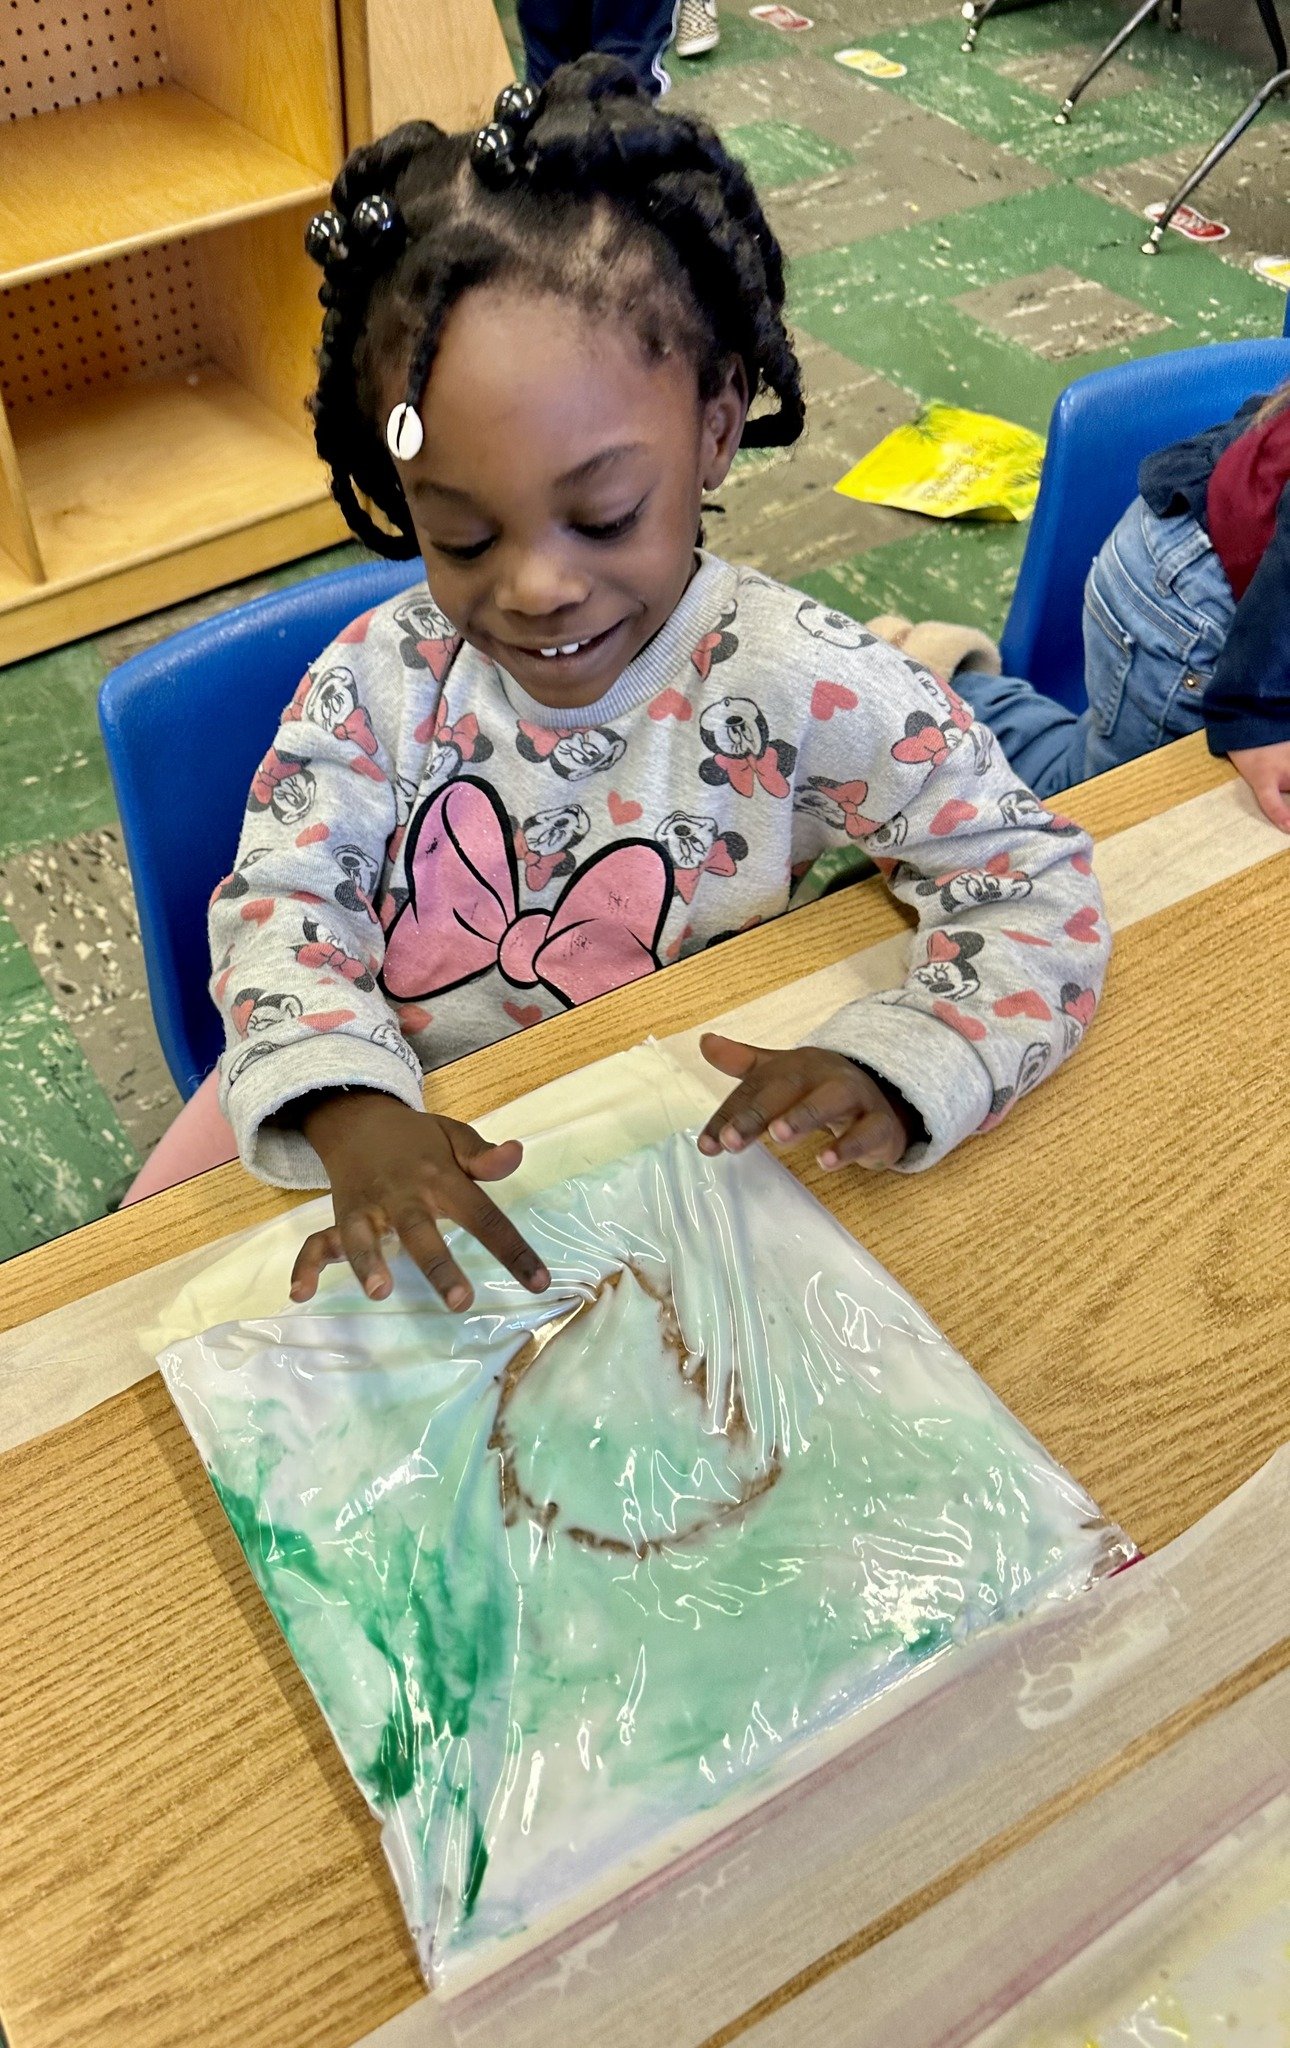  Wilson Head Start classroom #3  Ms. Reyes said, "I made sensory bags for the little ones today. A little shaving cream and washable paint and we had a fun filled letter recognition activity 